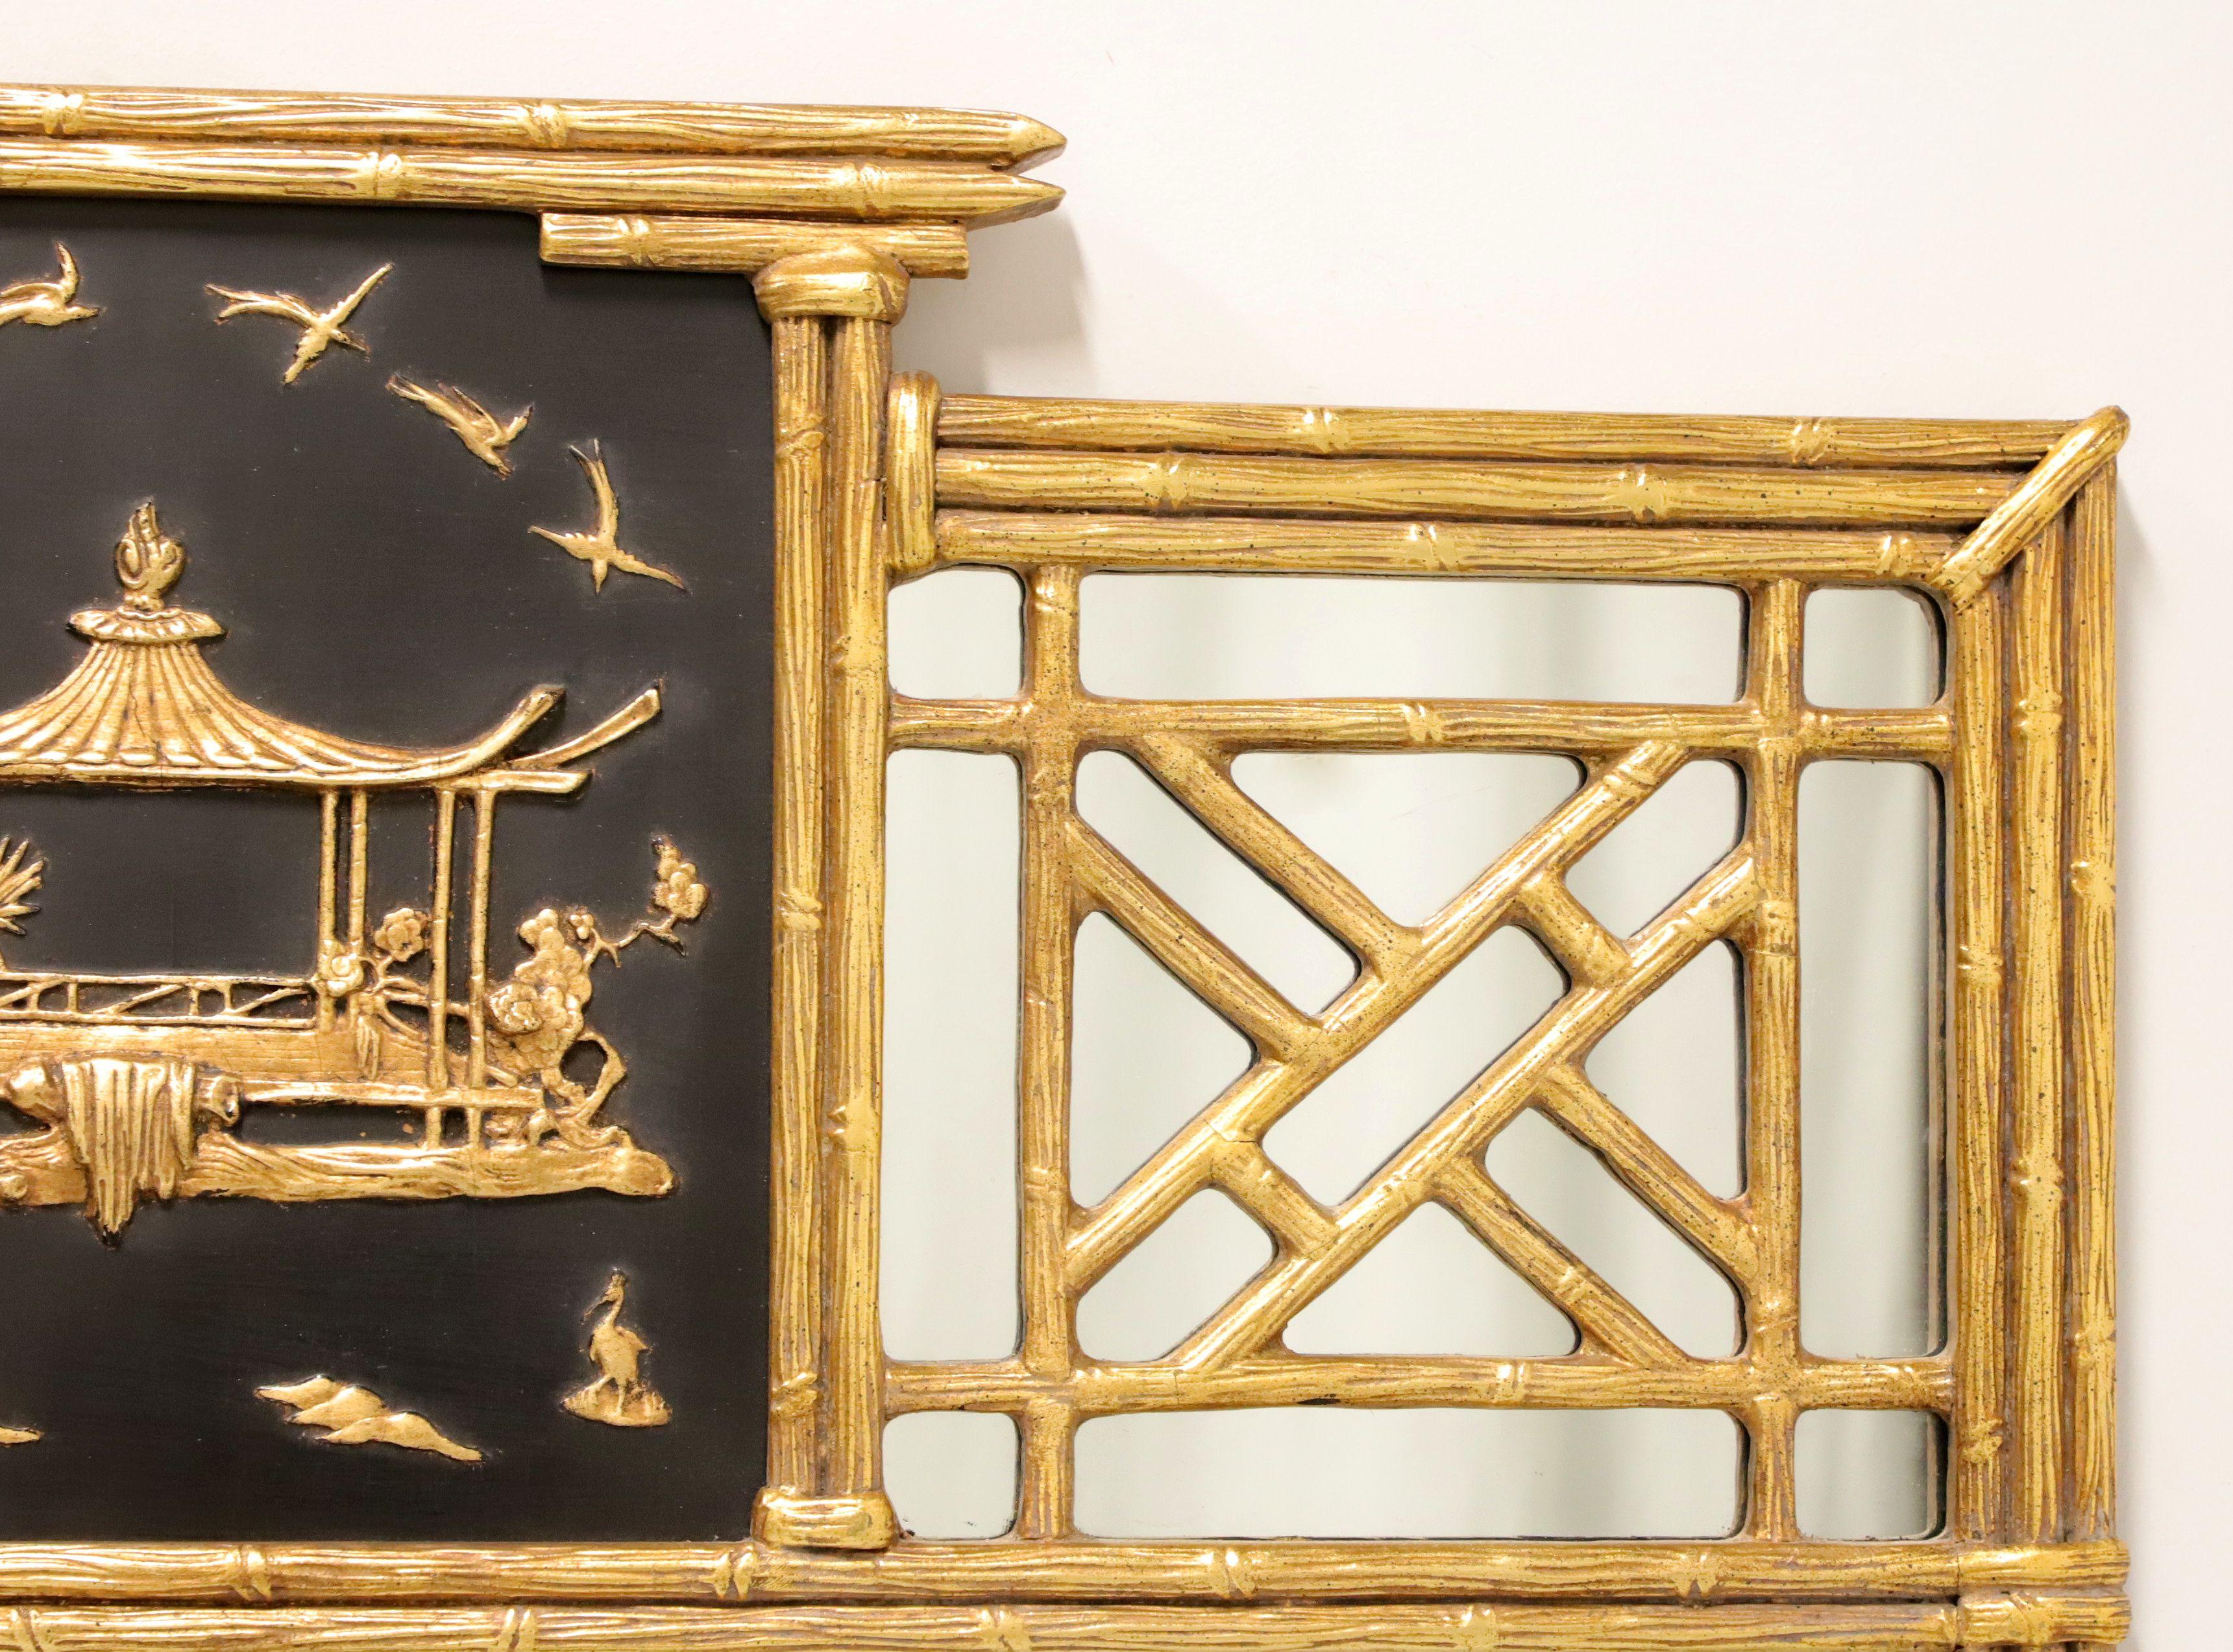 FRIEDMAN BROTHERS Gold Gilt Faux Bamboo Japanese Pagoda Mirror In Good Condition For Sale In Charlotte, NC